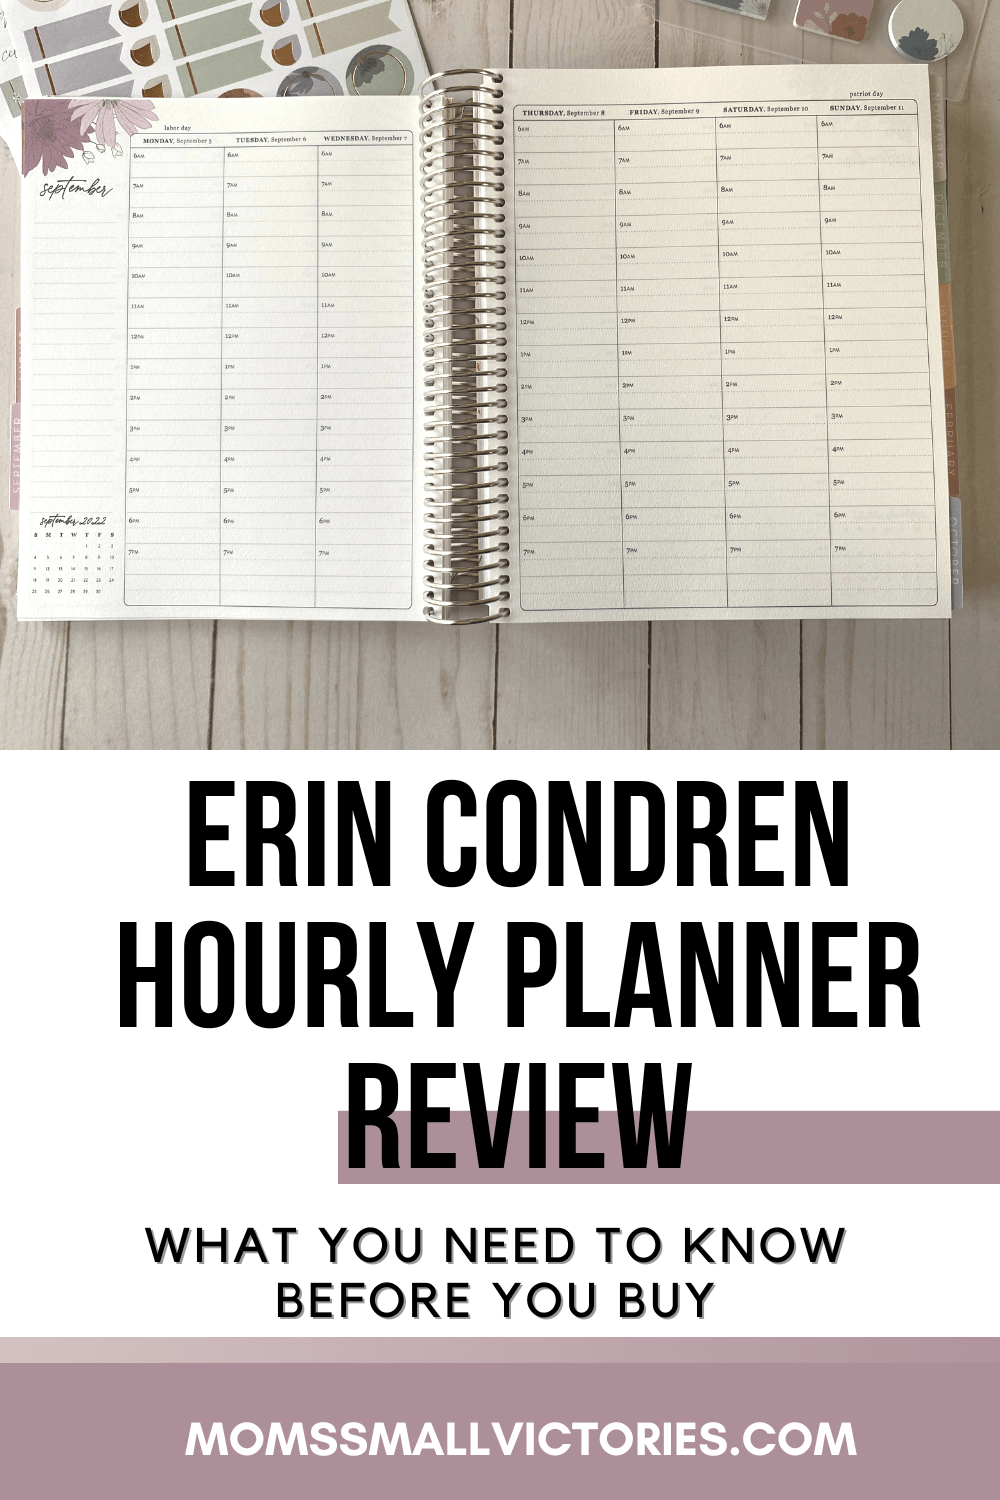 Erin Condren Hourly Planner review: what you need to know before you buy. Picture shows the Erin Condren hourly planner open to a week in September 2022 lying on top of a light wood background with some sticker sheets underneath it in the top.